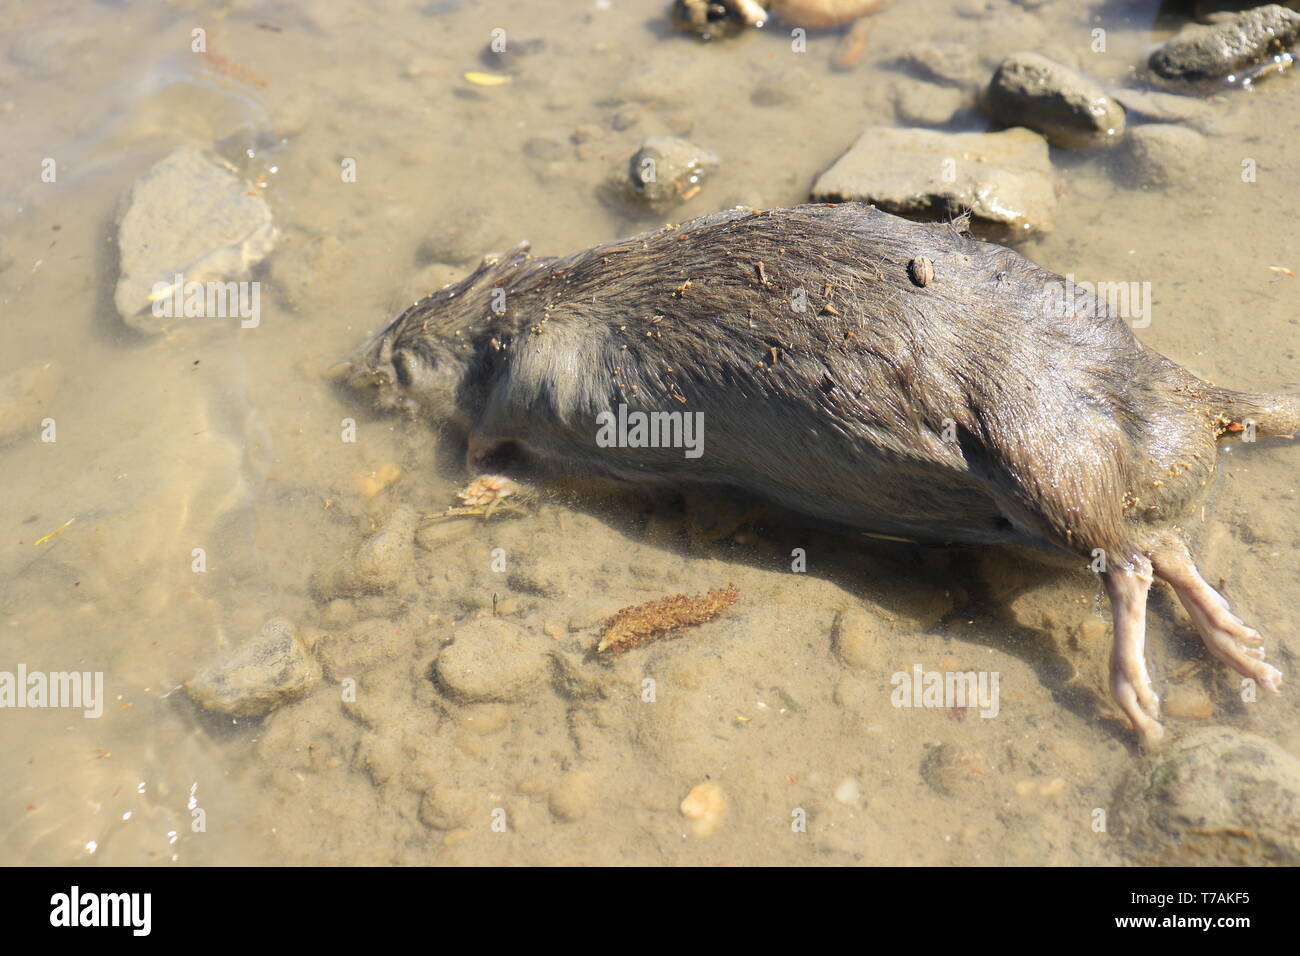 Dead rat lies on the river bank close up Stock Photo